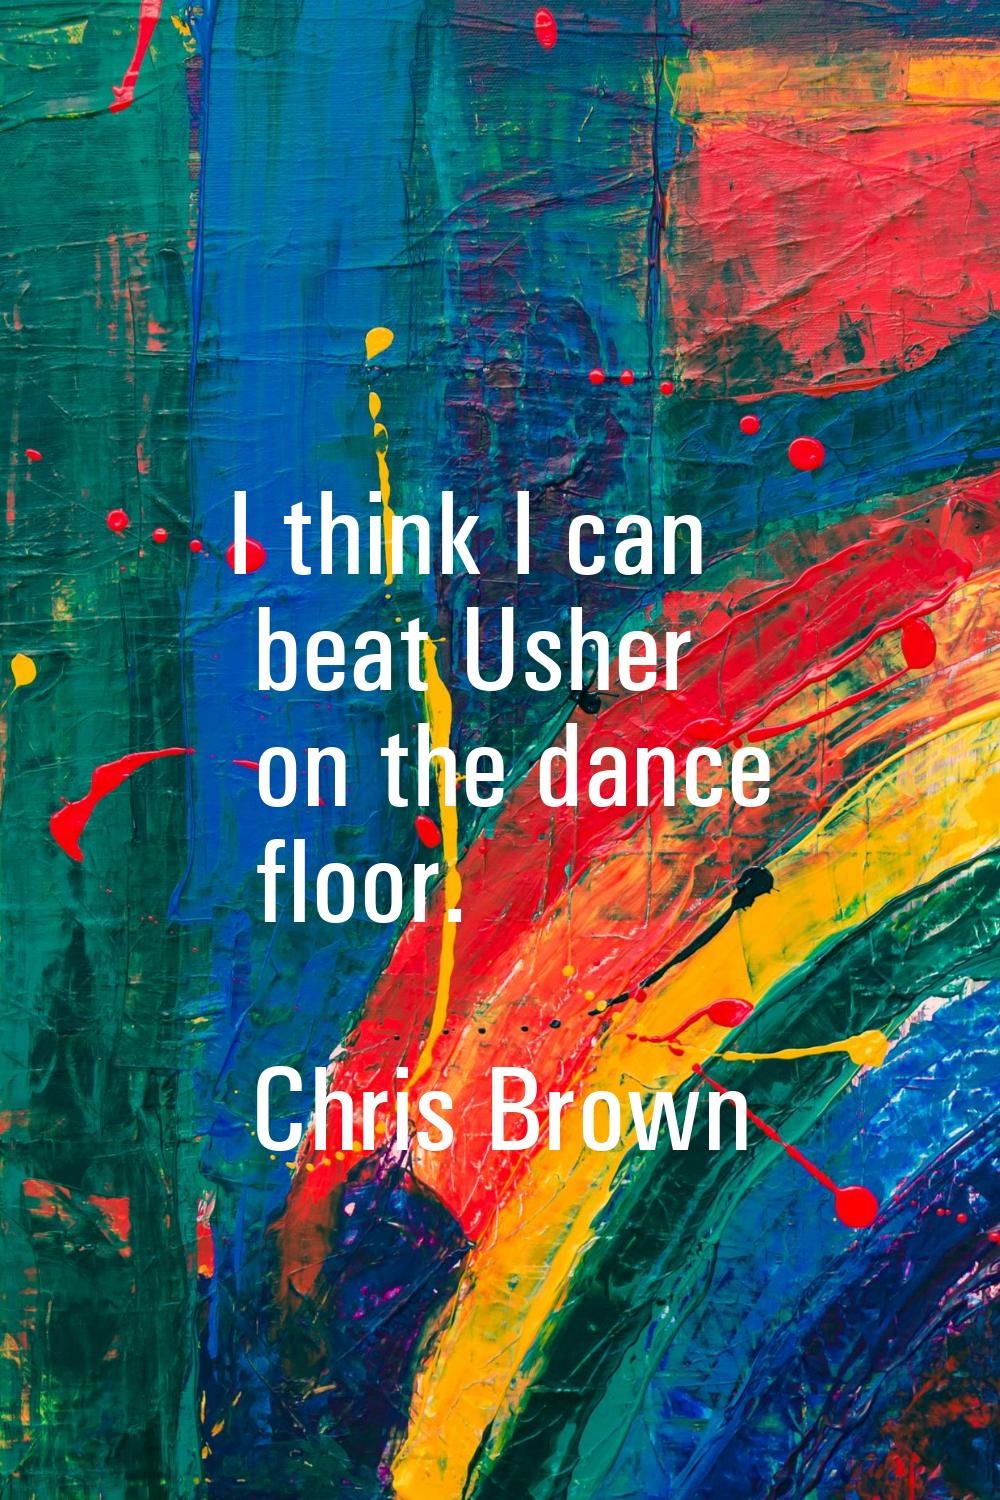 I think I can beat Usher on the dance floor.